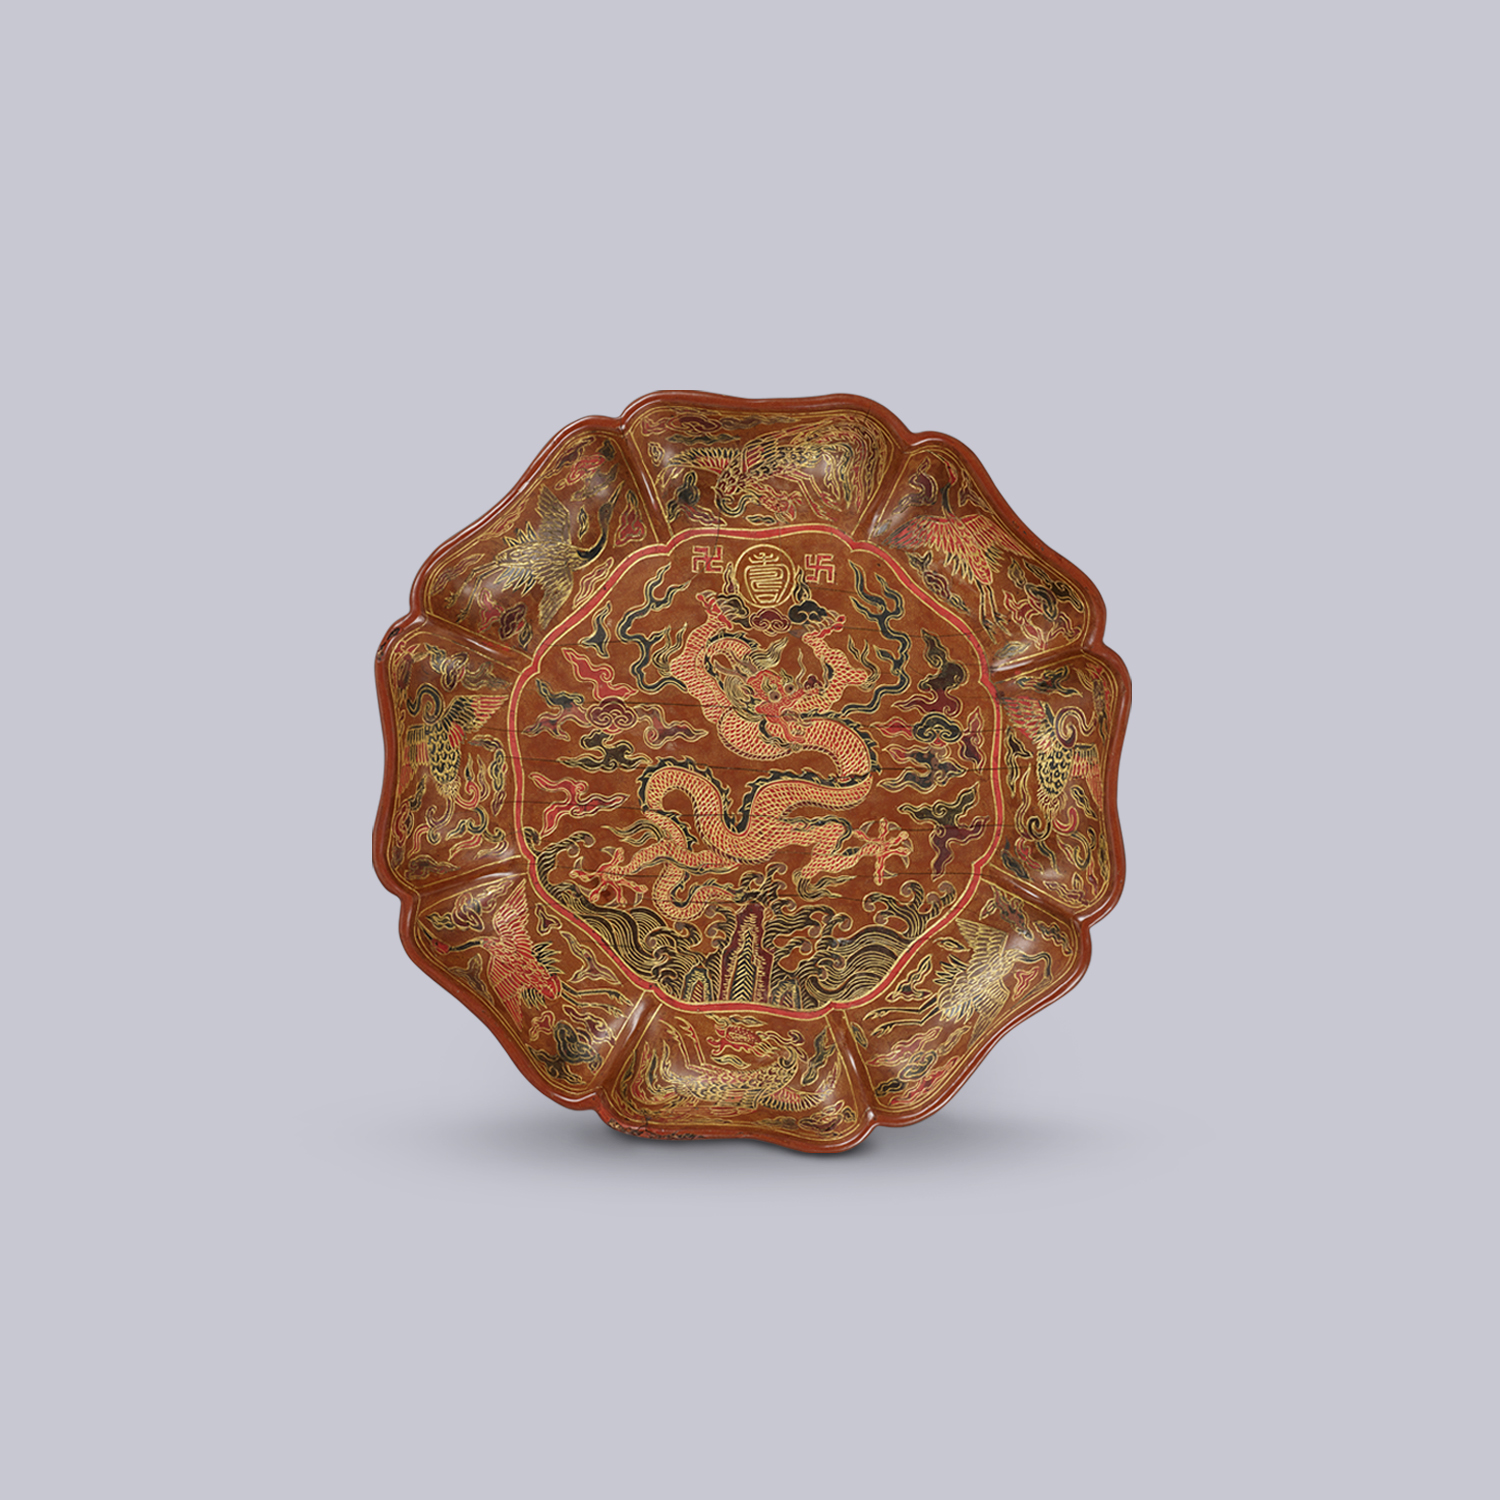 Prunus-shaped dish with dragon and <i>shou</i> character design in <i>qiangjin</i> technique